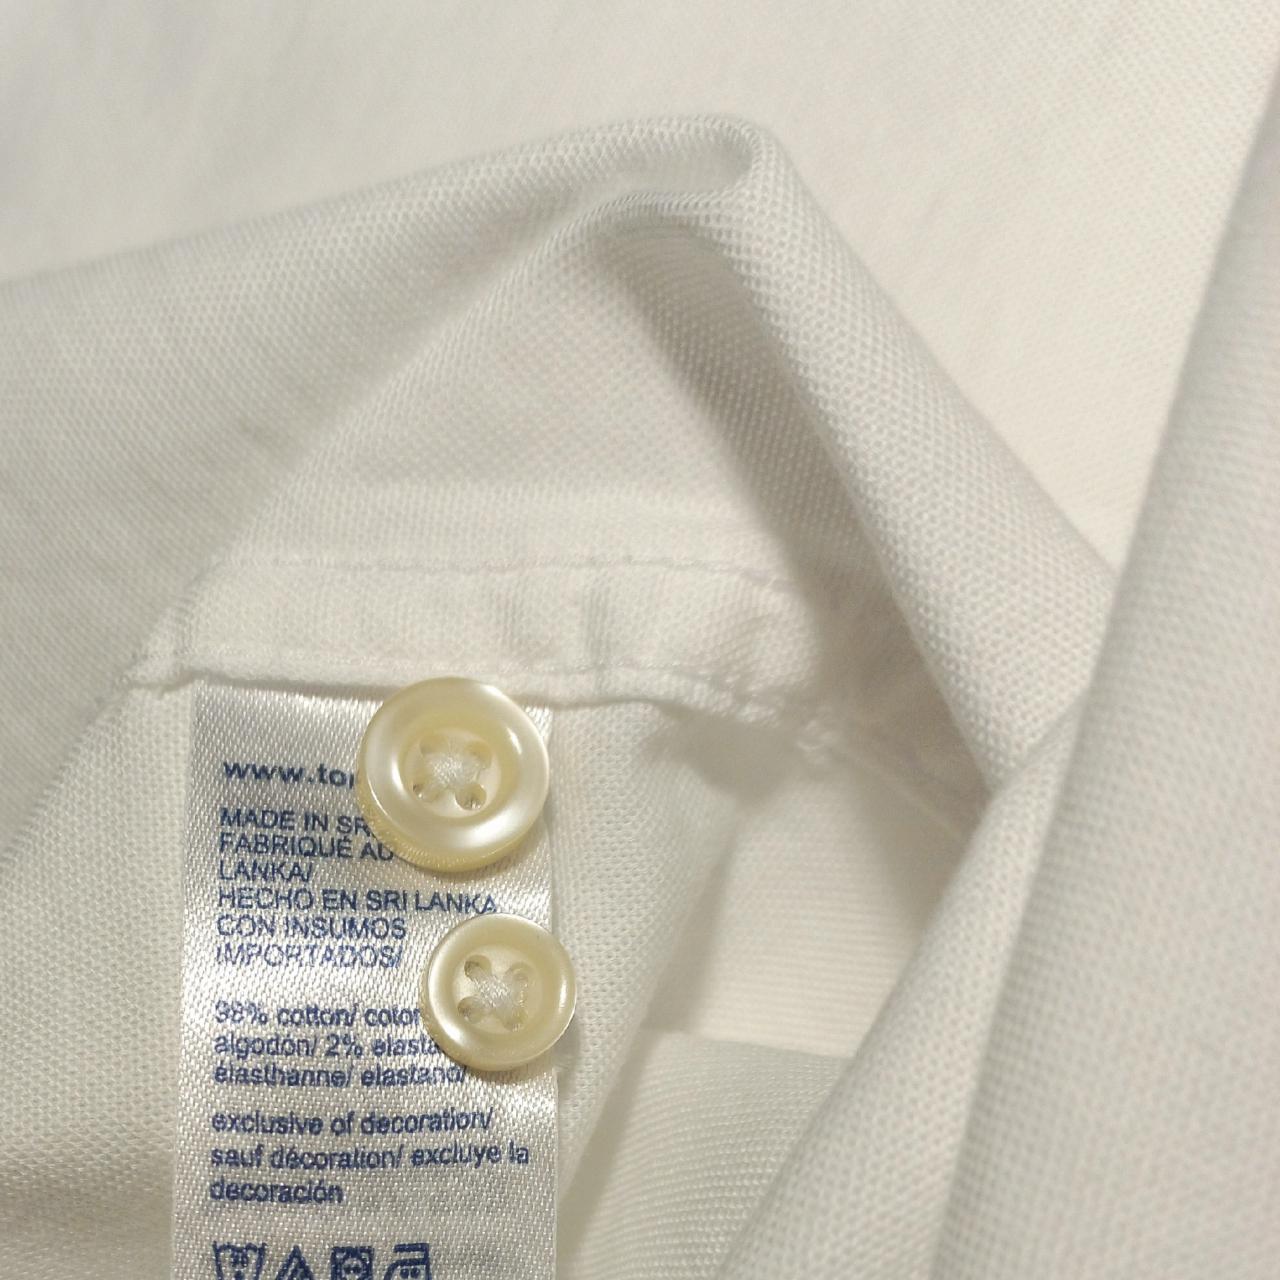 New there is a stain on the shoulder, possibly from... - Depop